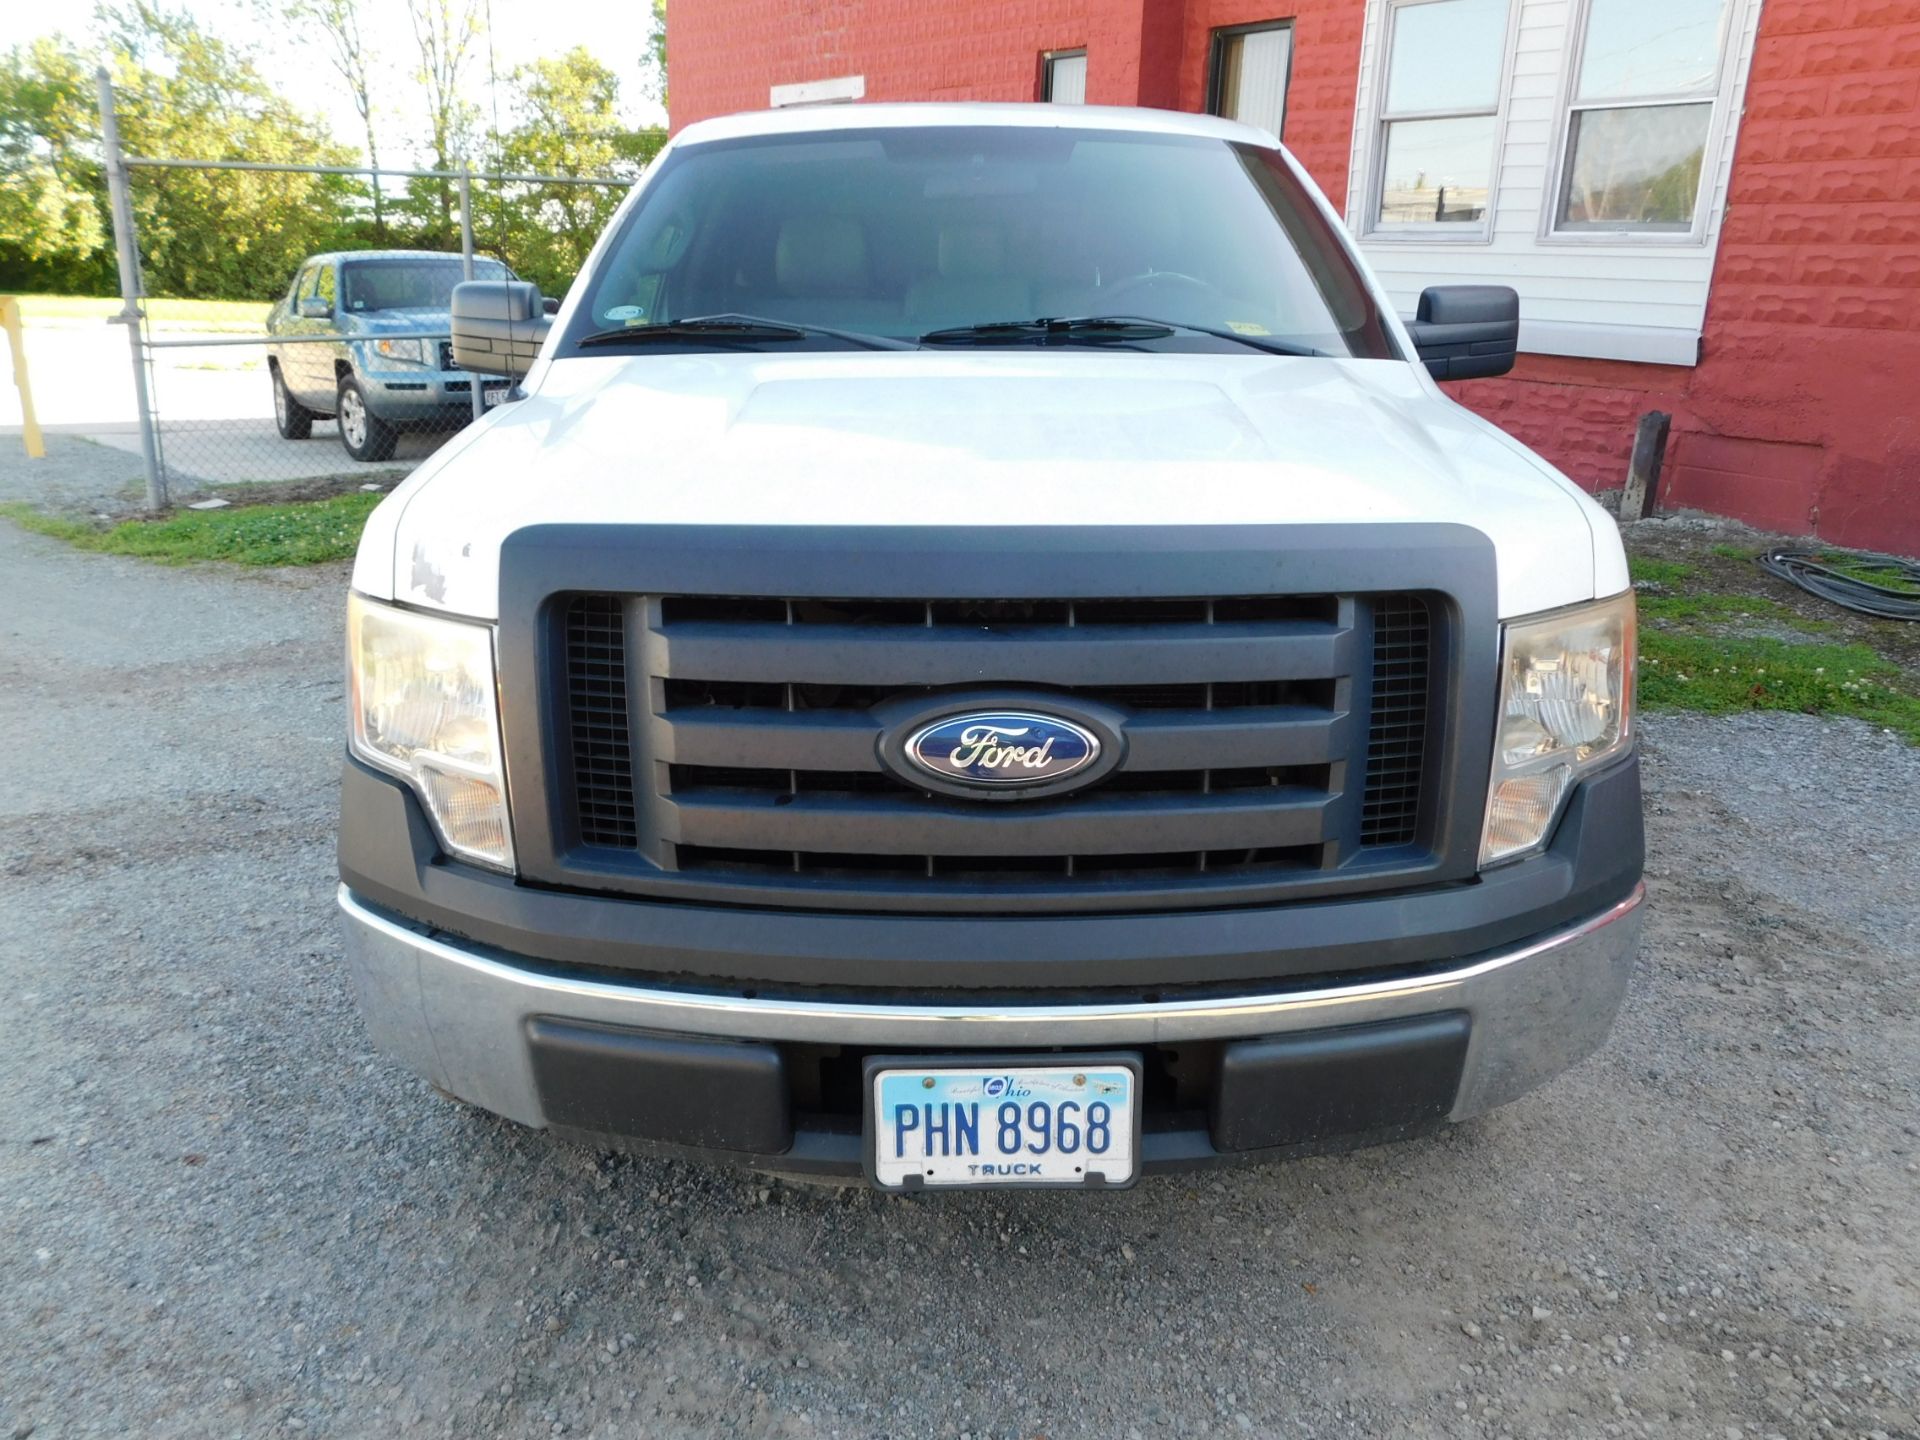 2011 Ford Pick up F-150XL vin 1FTMF1CM3CKD12942, Automatic Transmission, PW, Pl, 8'Bed w/Cap 146,289 - Image 3 of 46